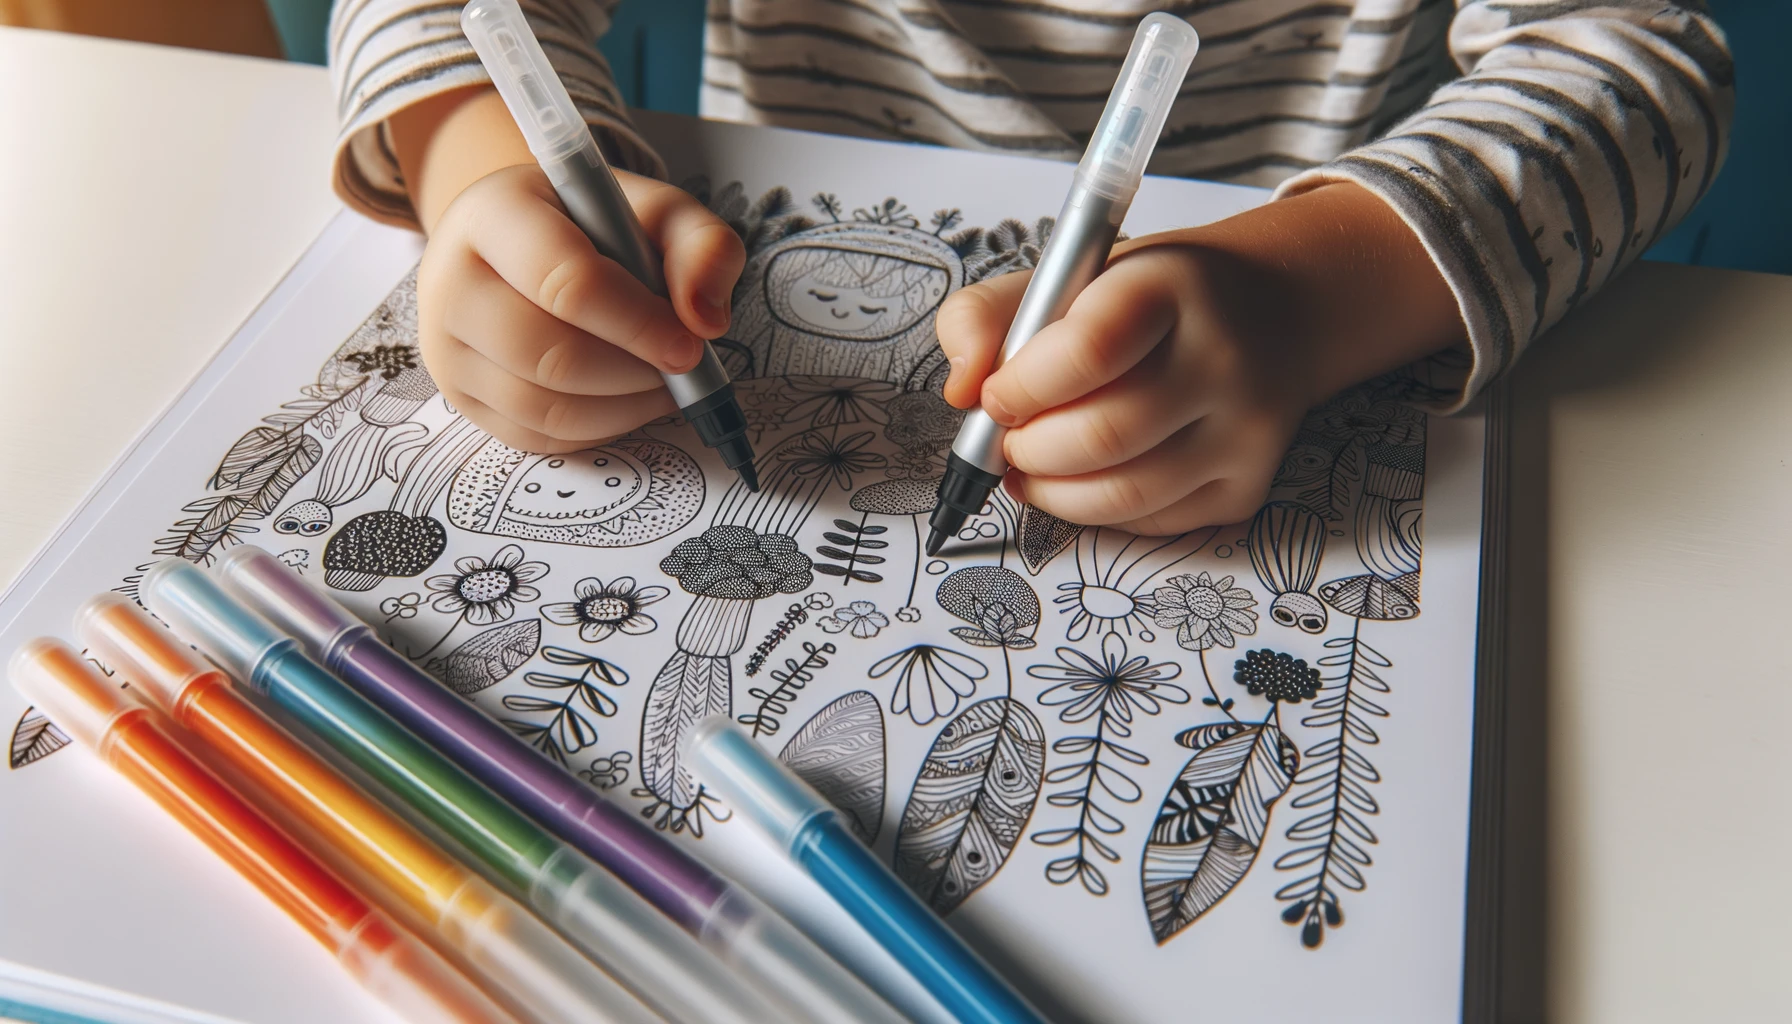 Kids Crafts: Safe and Mess-Free Pens for Young Artists